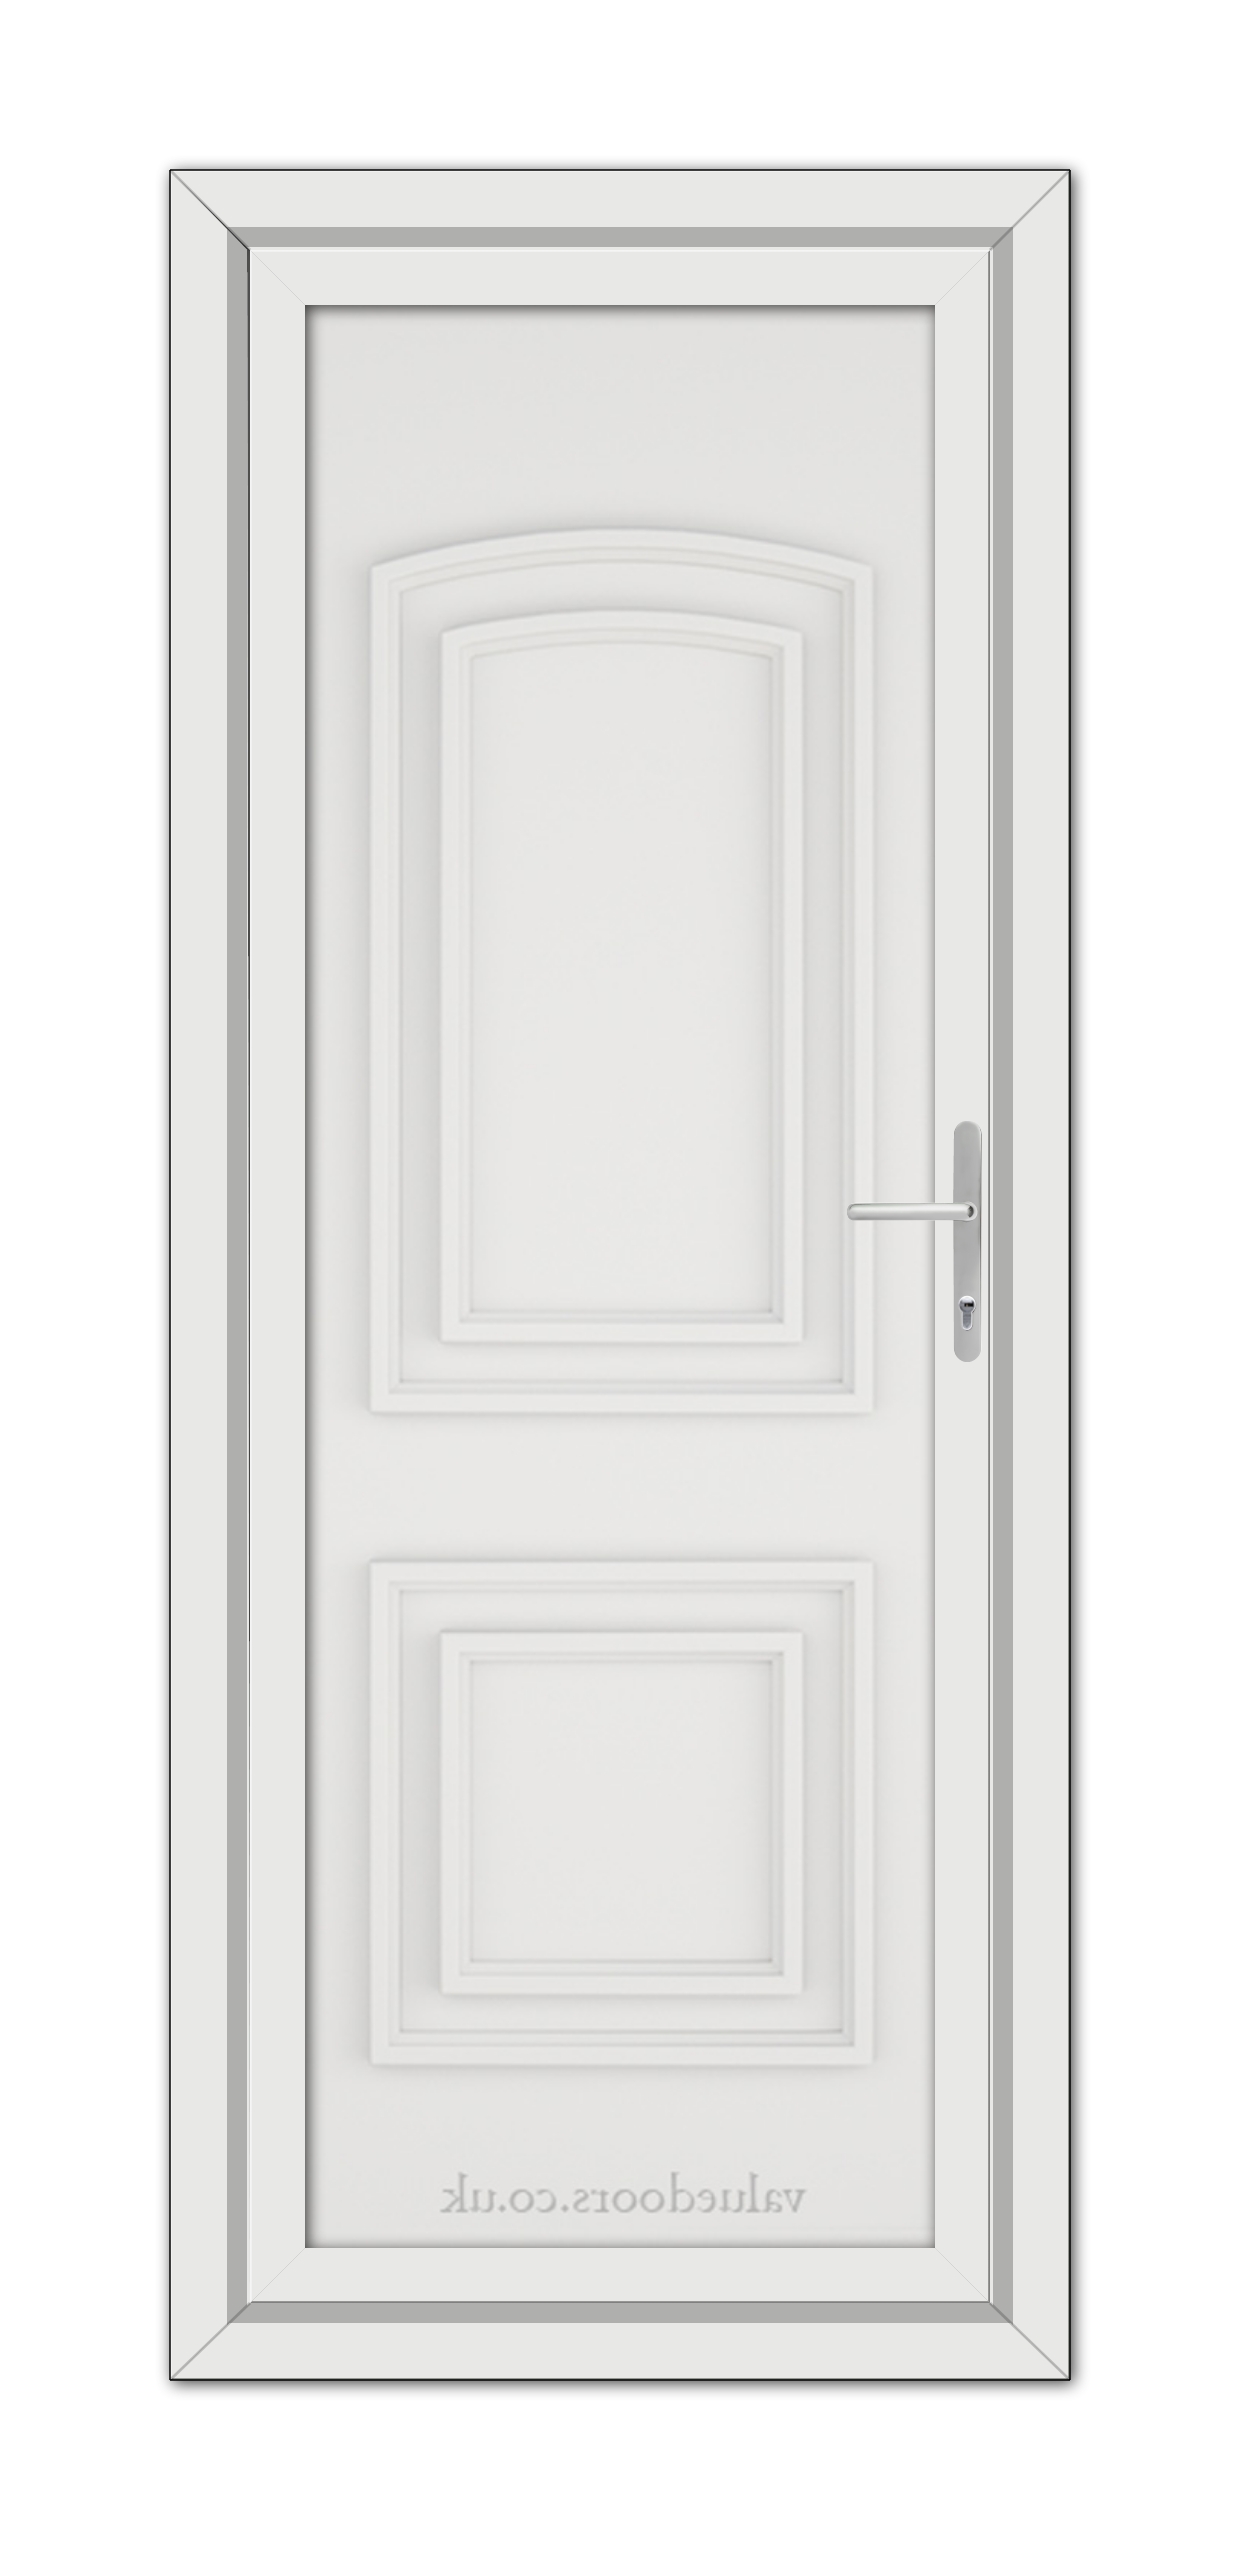 A vertical image of a closed White Balmoral Solid uPVC Door framed in the wall, featuring a rectangular handle on the right side.